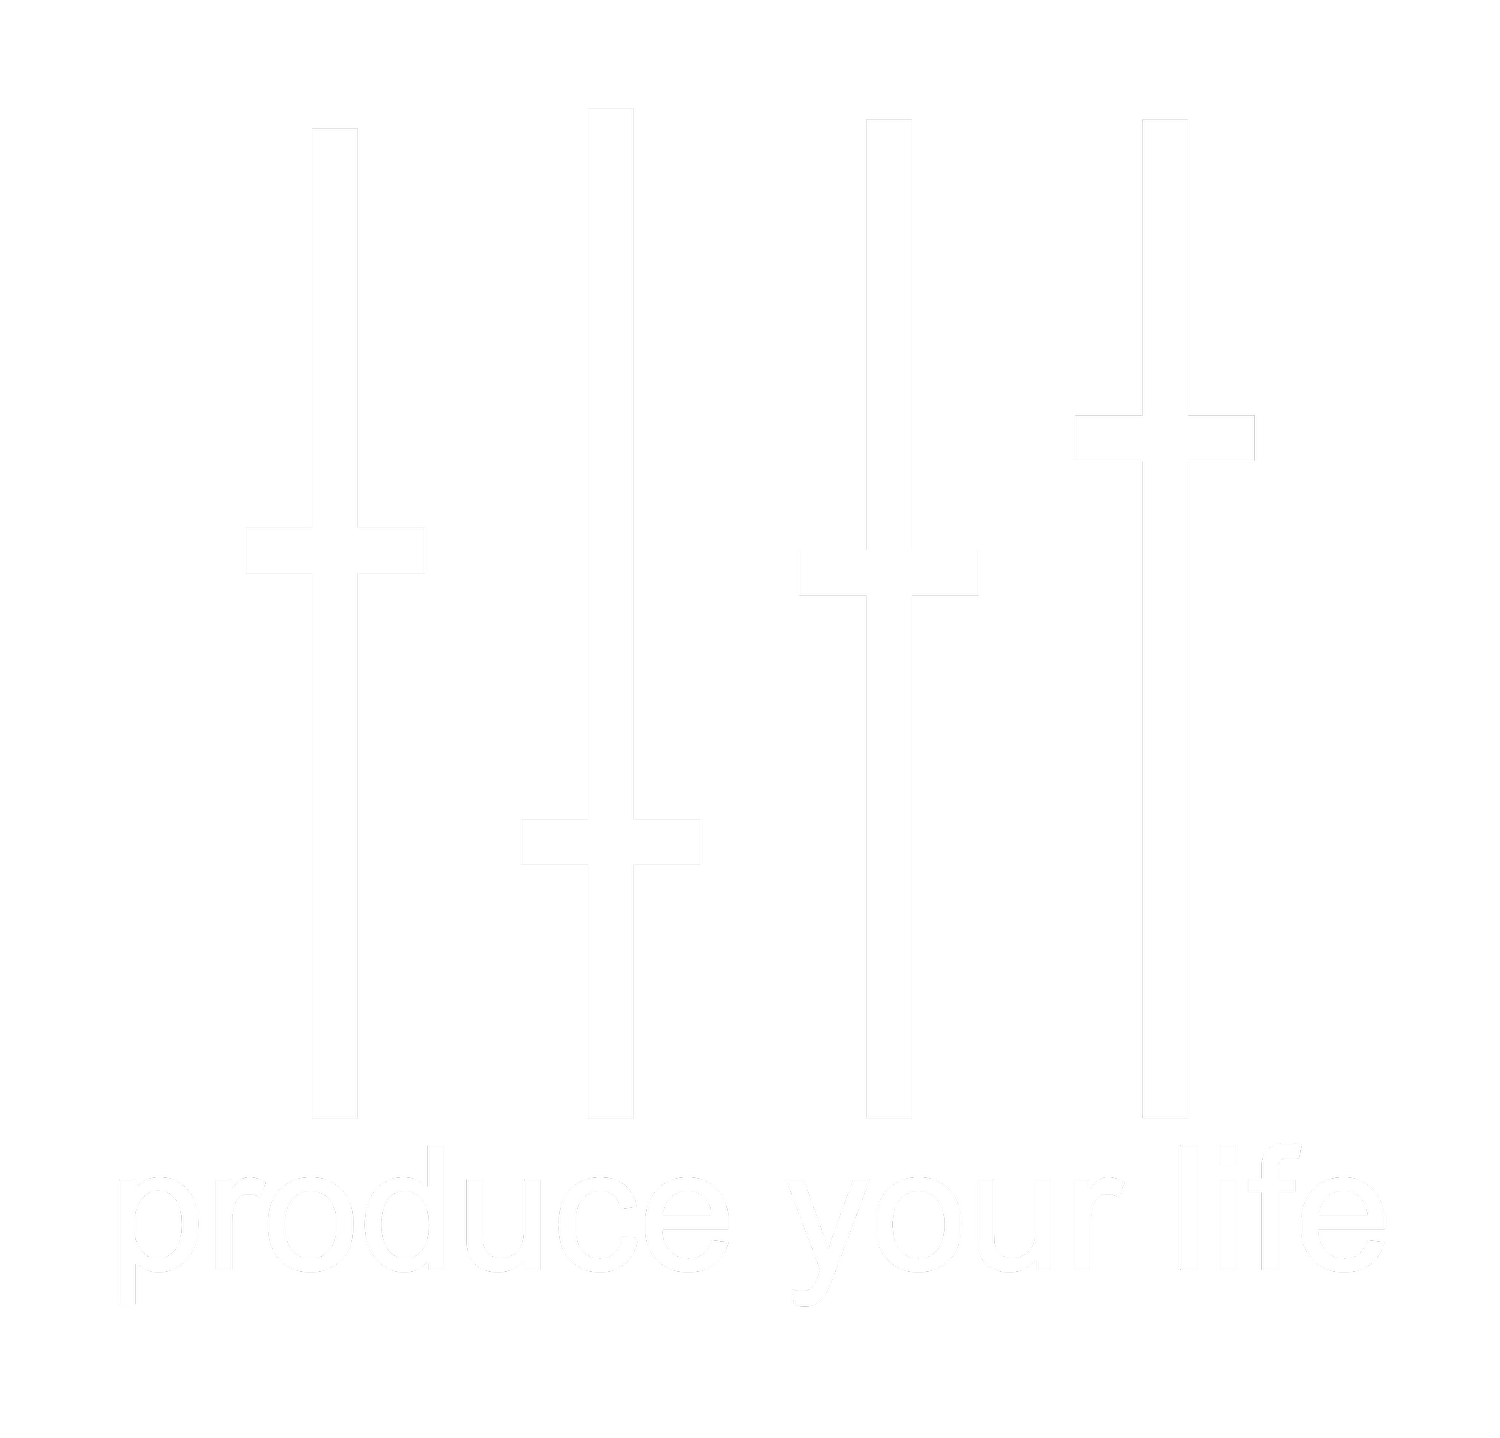 Produce Your Life